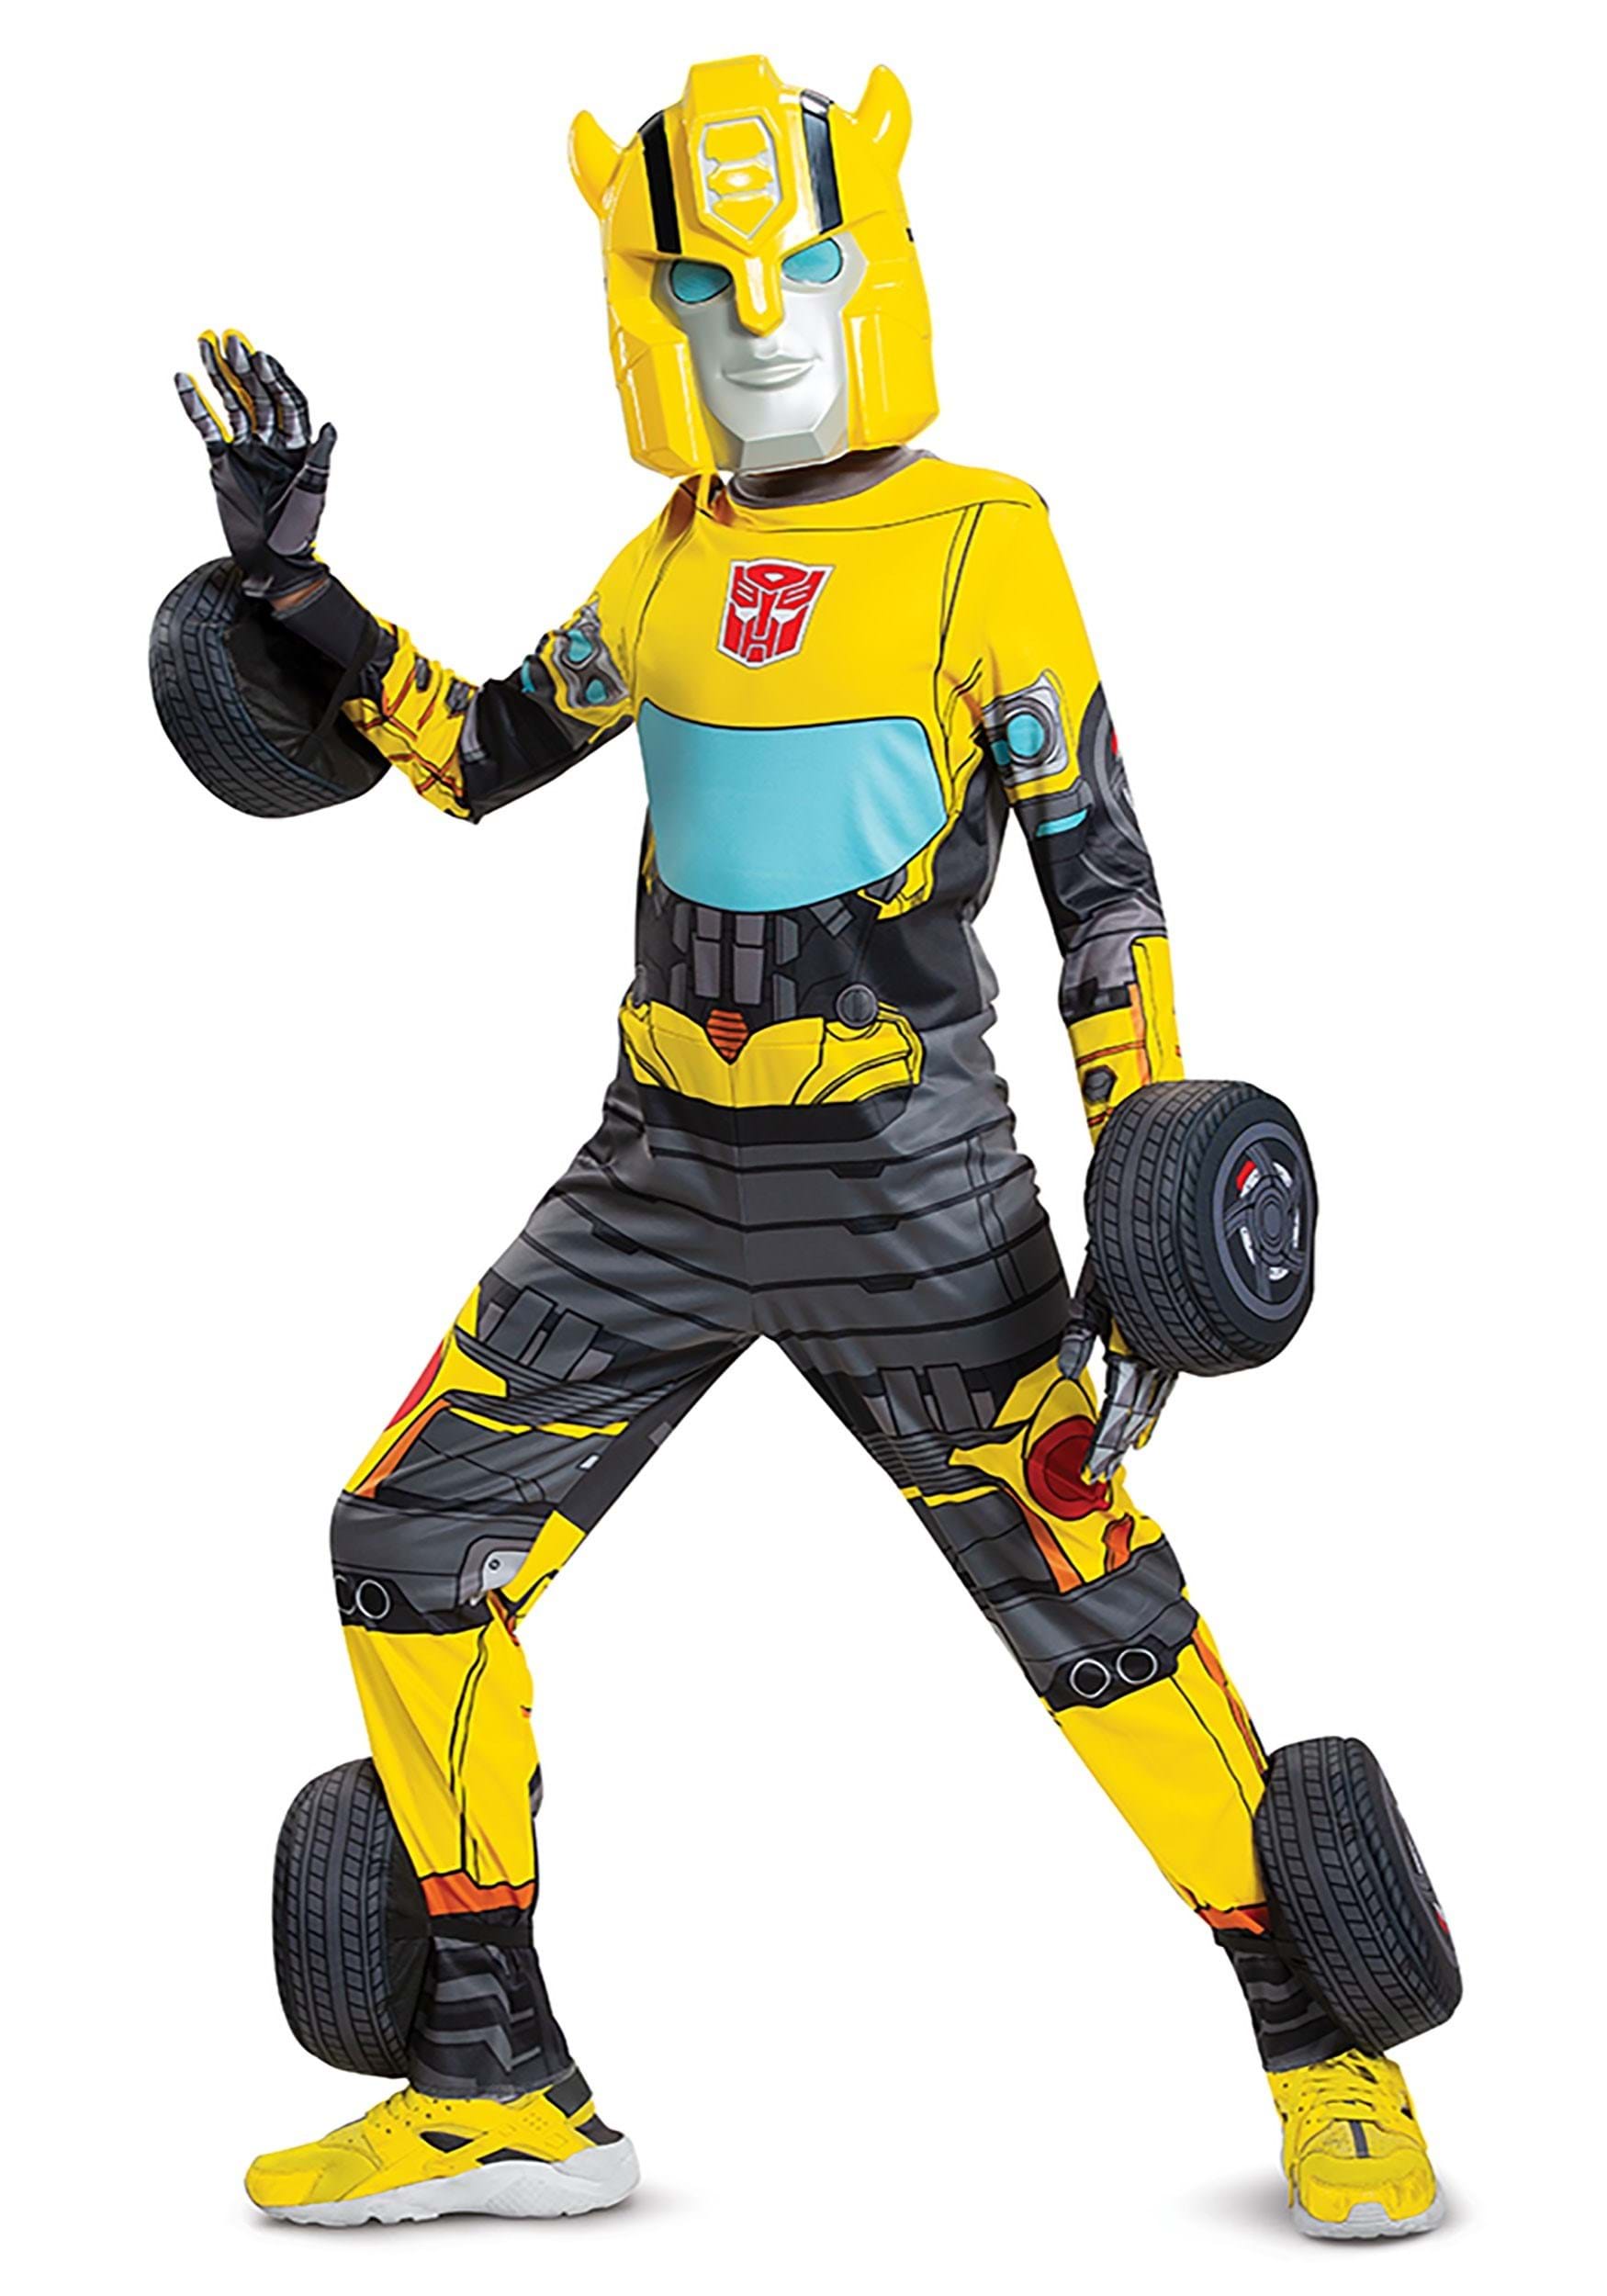 Converting Bumblebee Transformers Costume for Kids